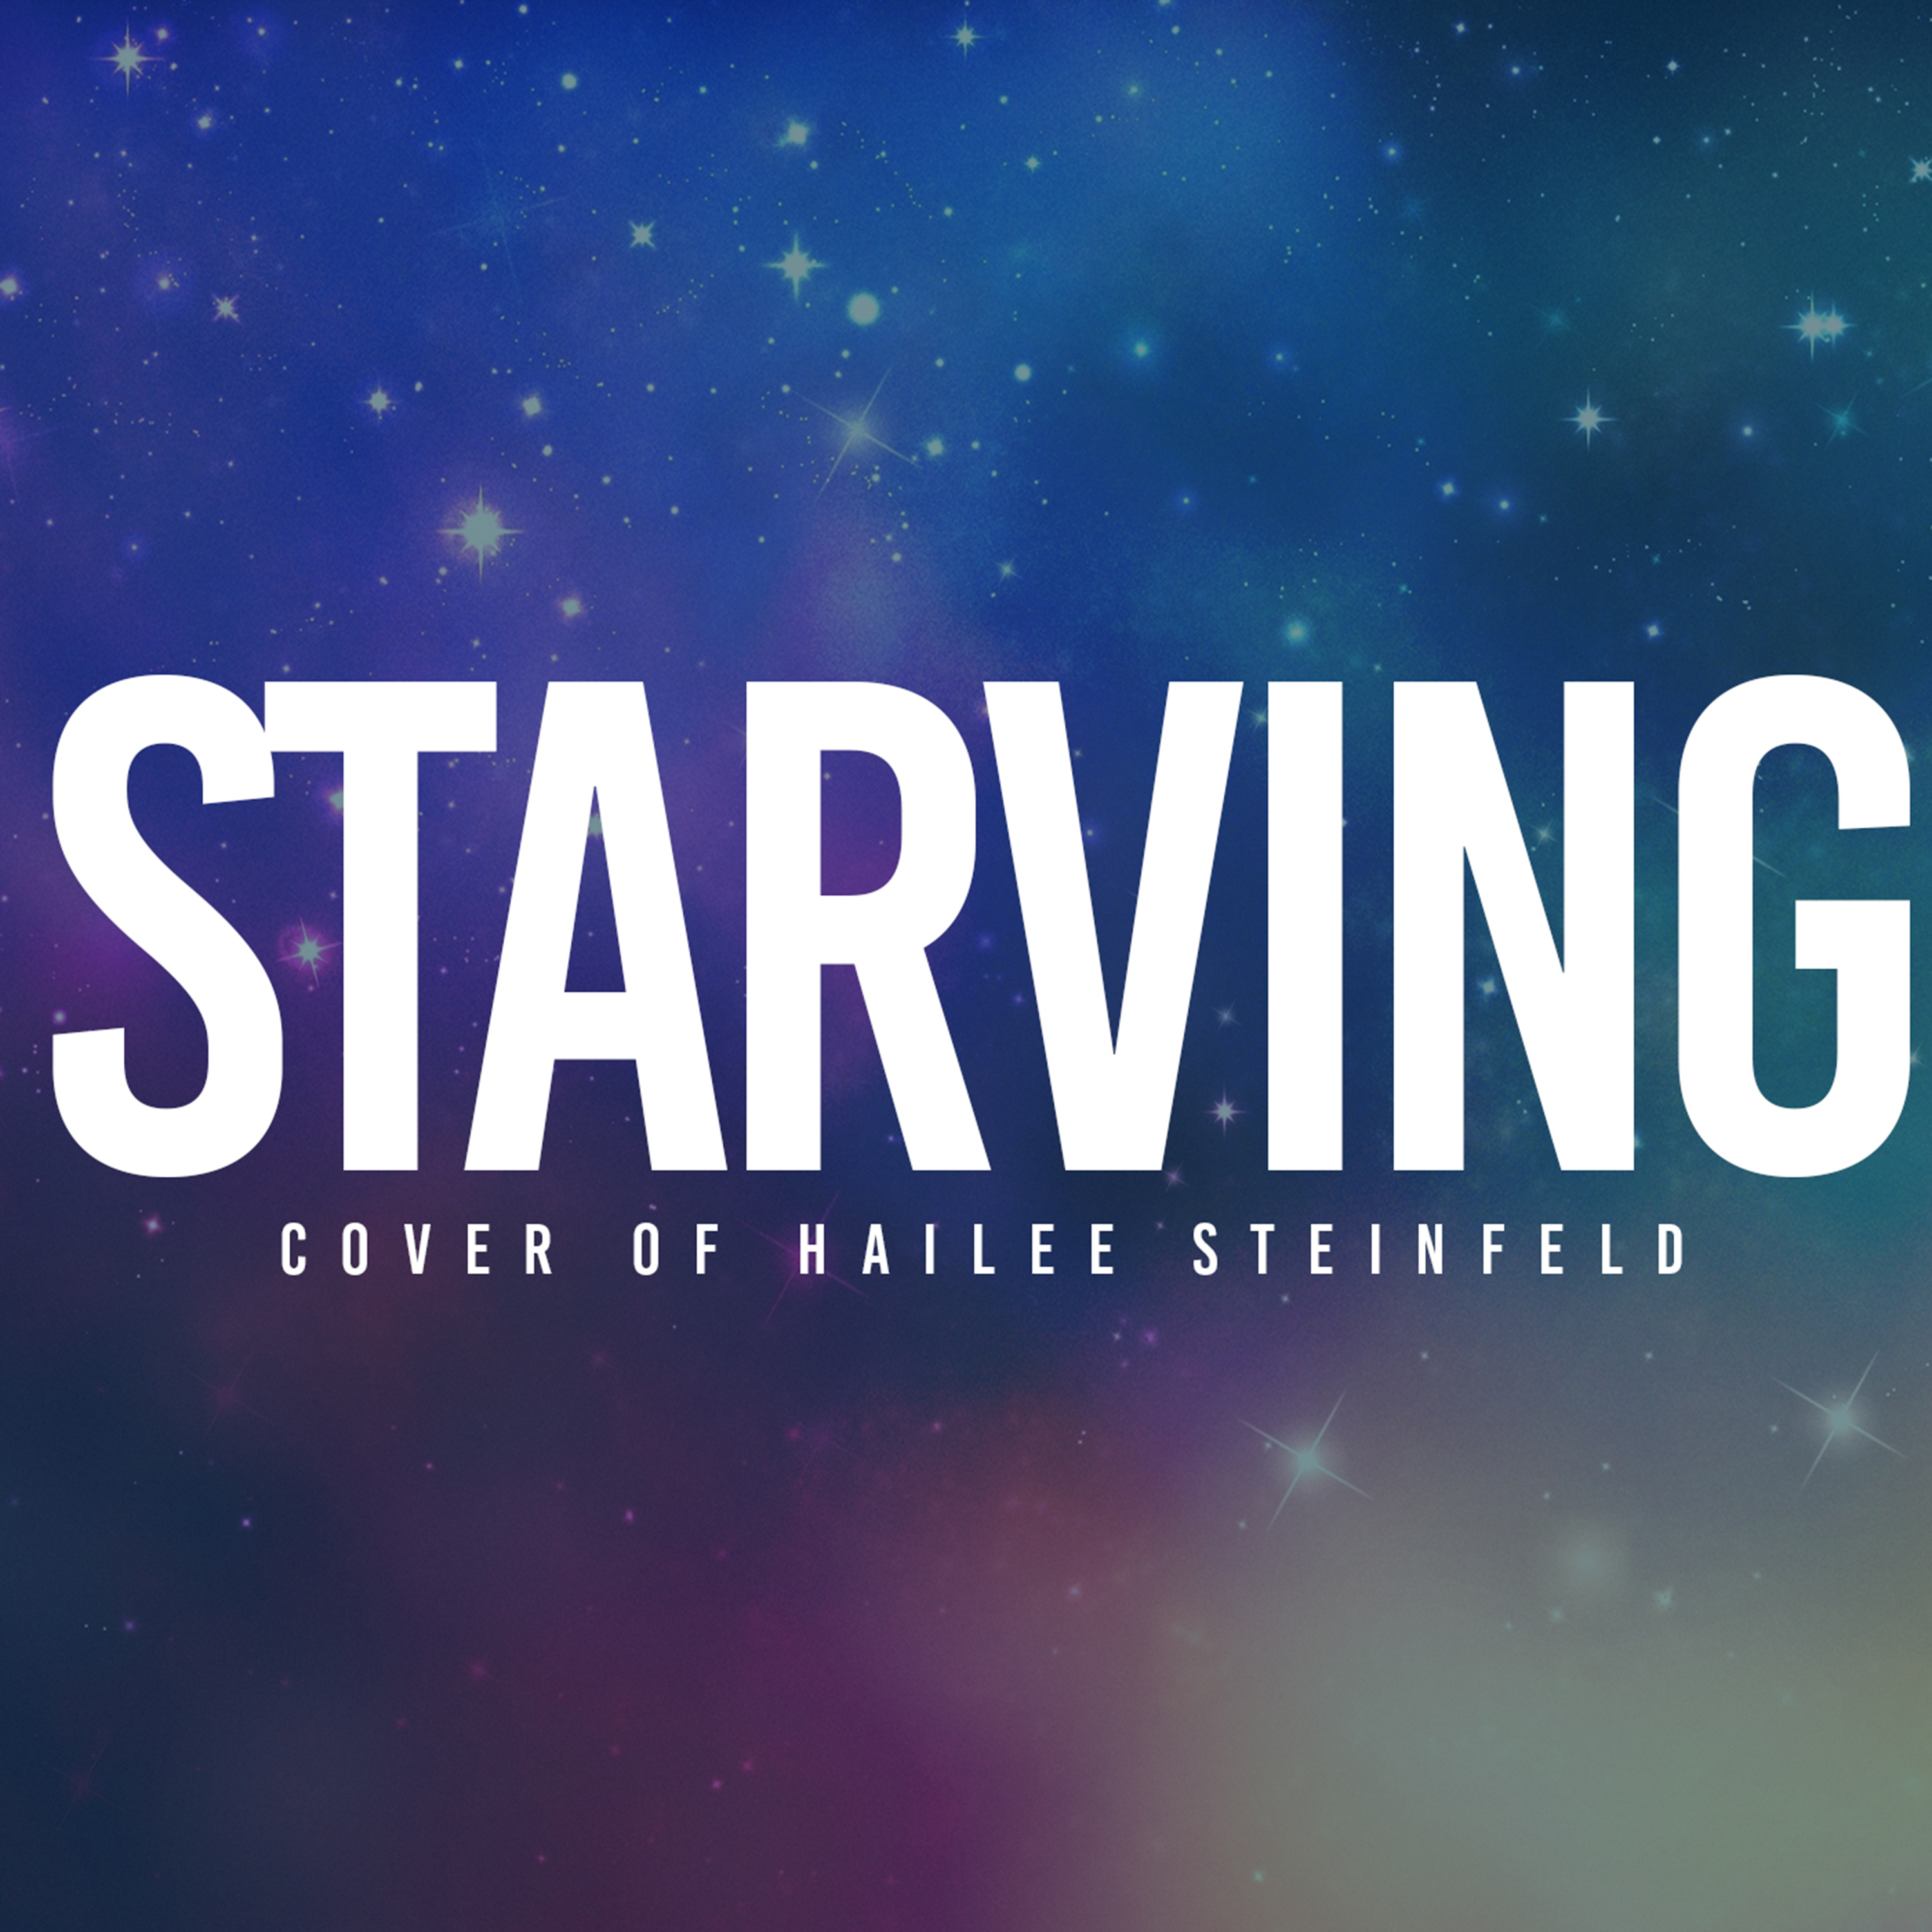 Starving (Cover of Hailee Steinfield)